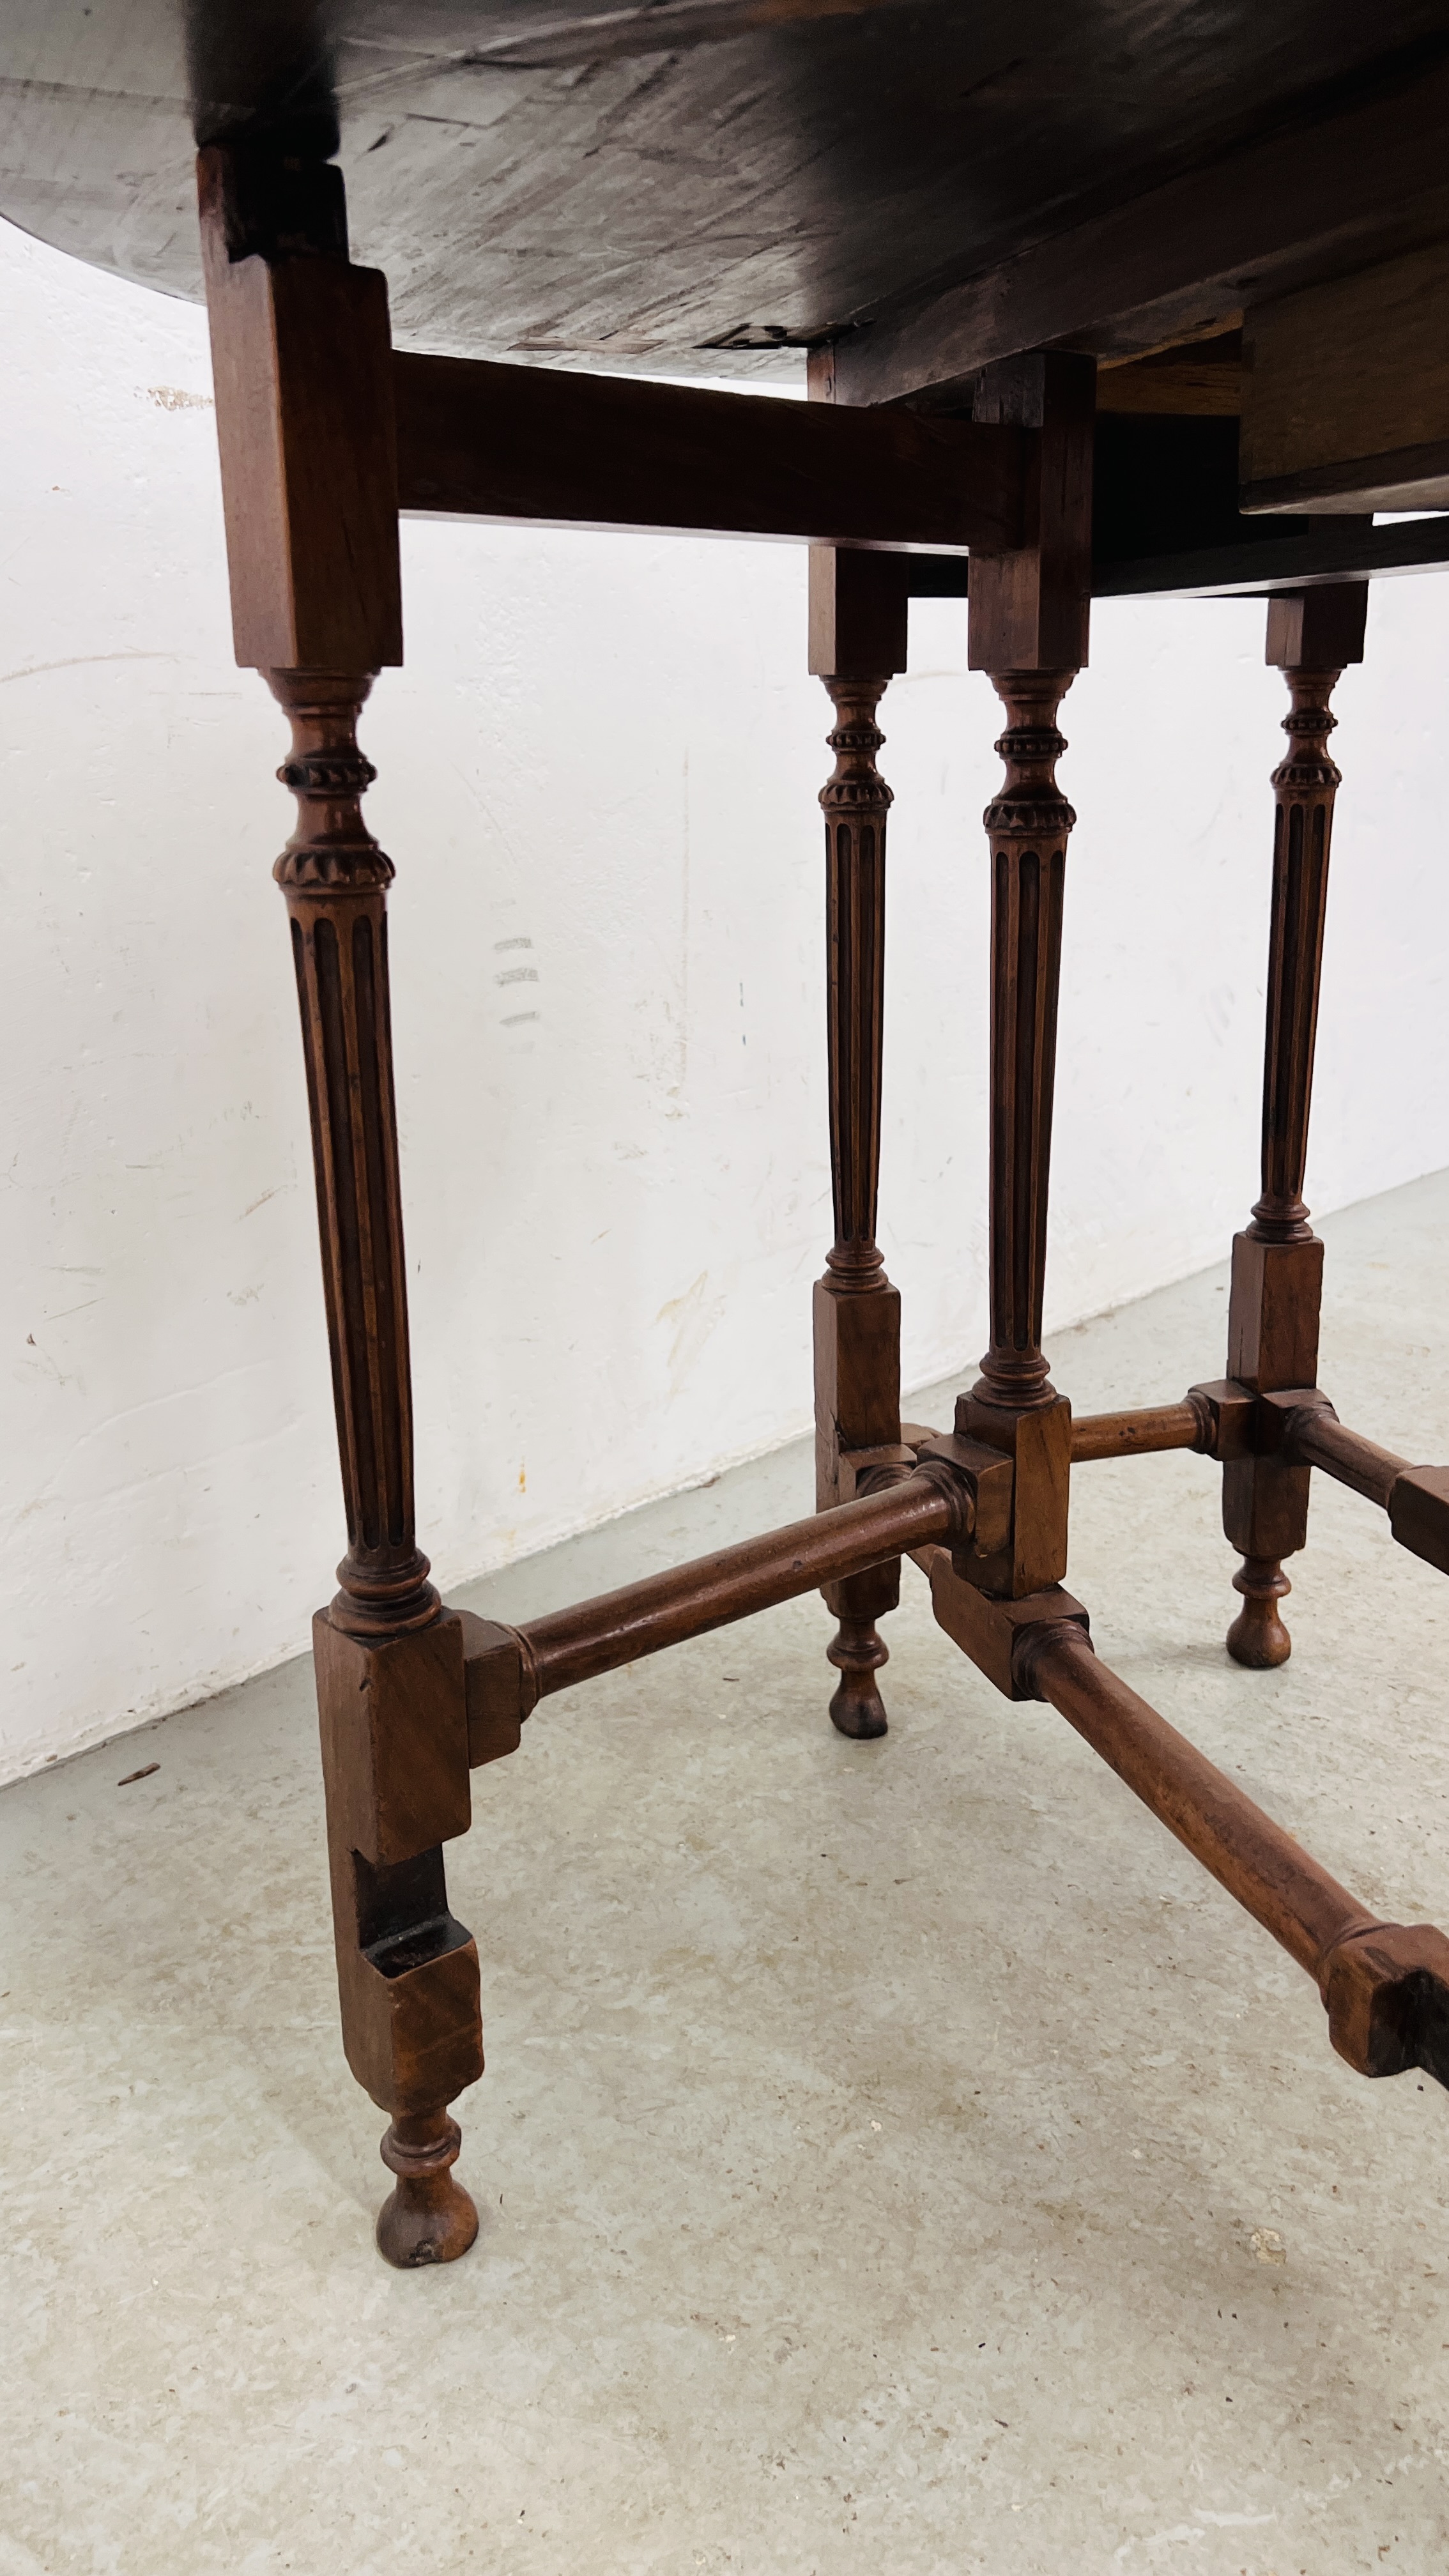 A MAHOGANY GATELEG TABLE, C18TH. AND LATER, EXTENDED 100CM. - Image 15 of 18